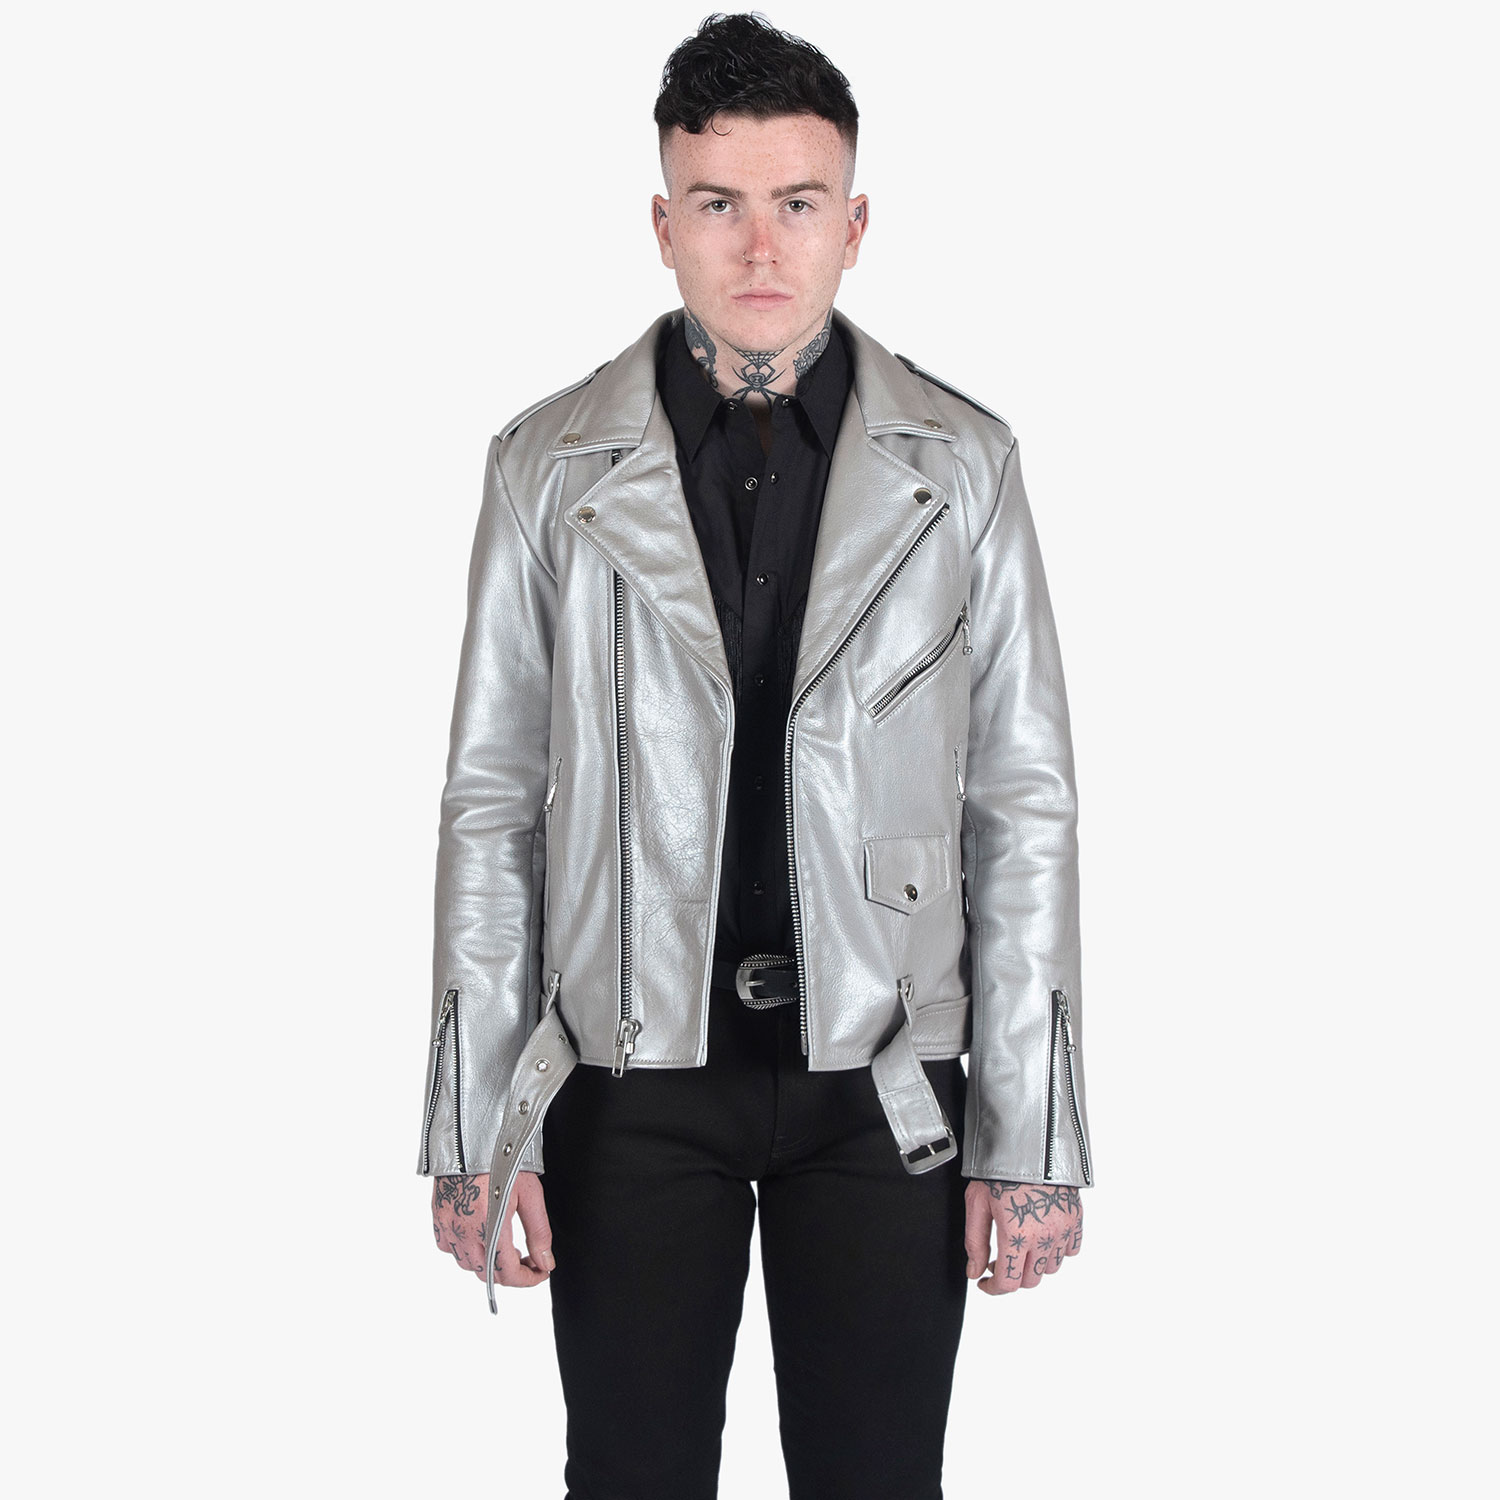 Commando - Silver Leather Jacket - Men's by Straight to Hell